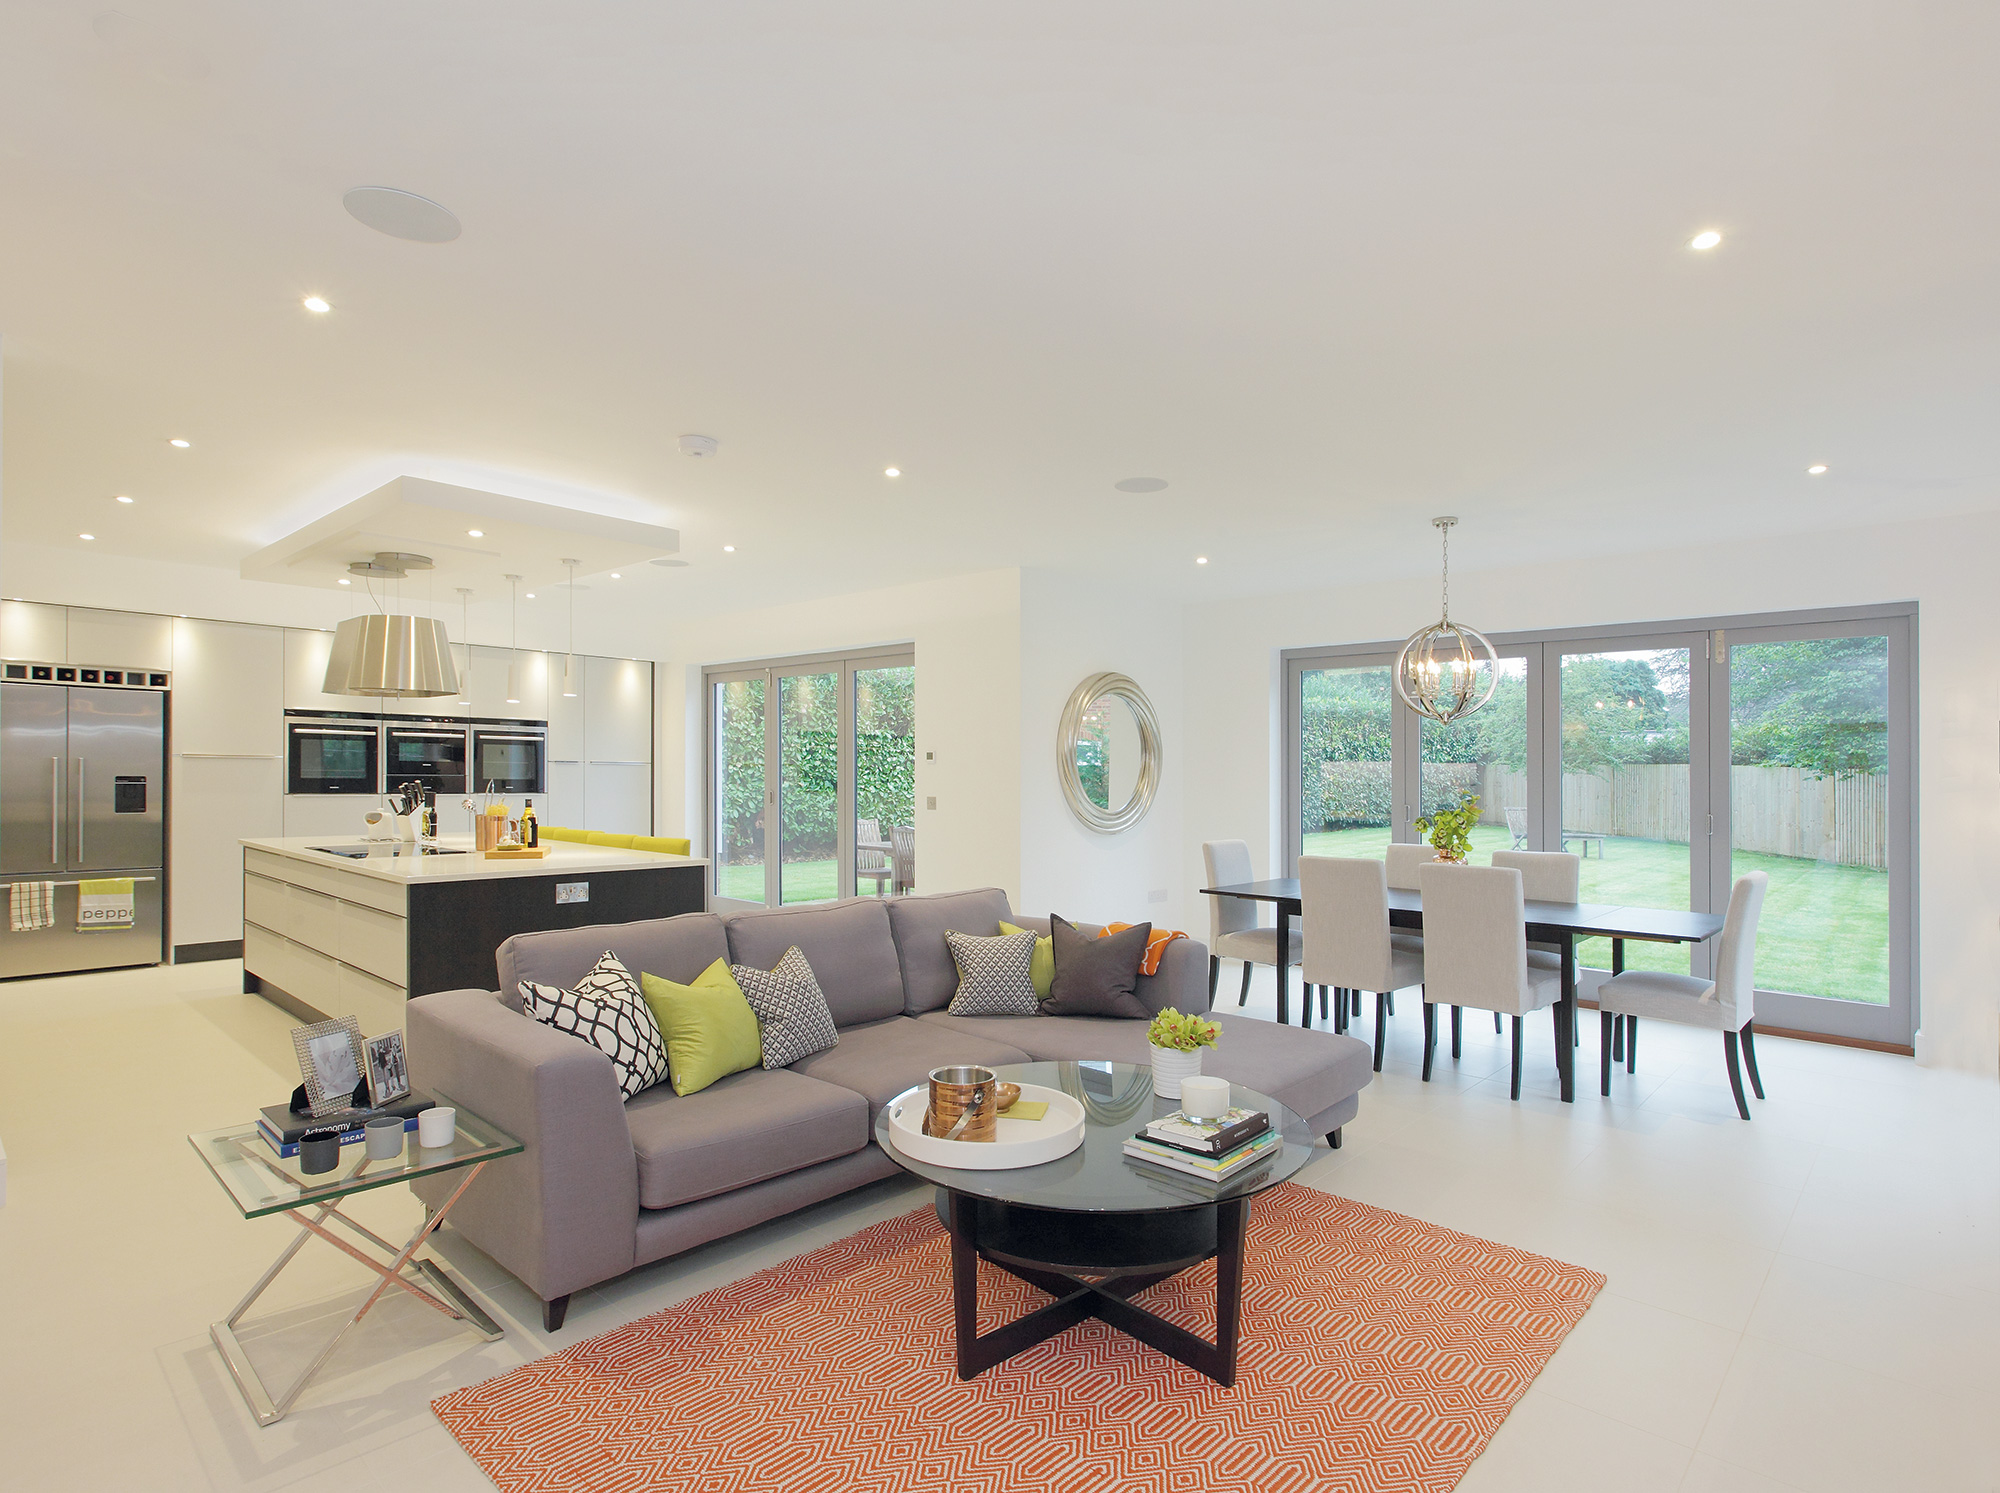 The Pros and Cons of Open Plan Home Design   Build It